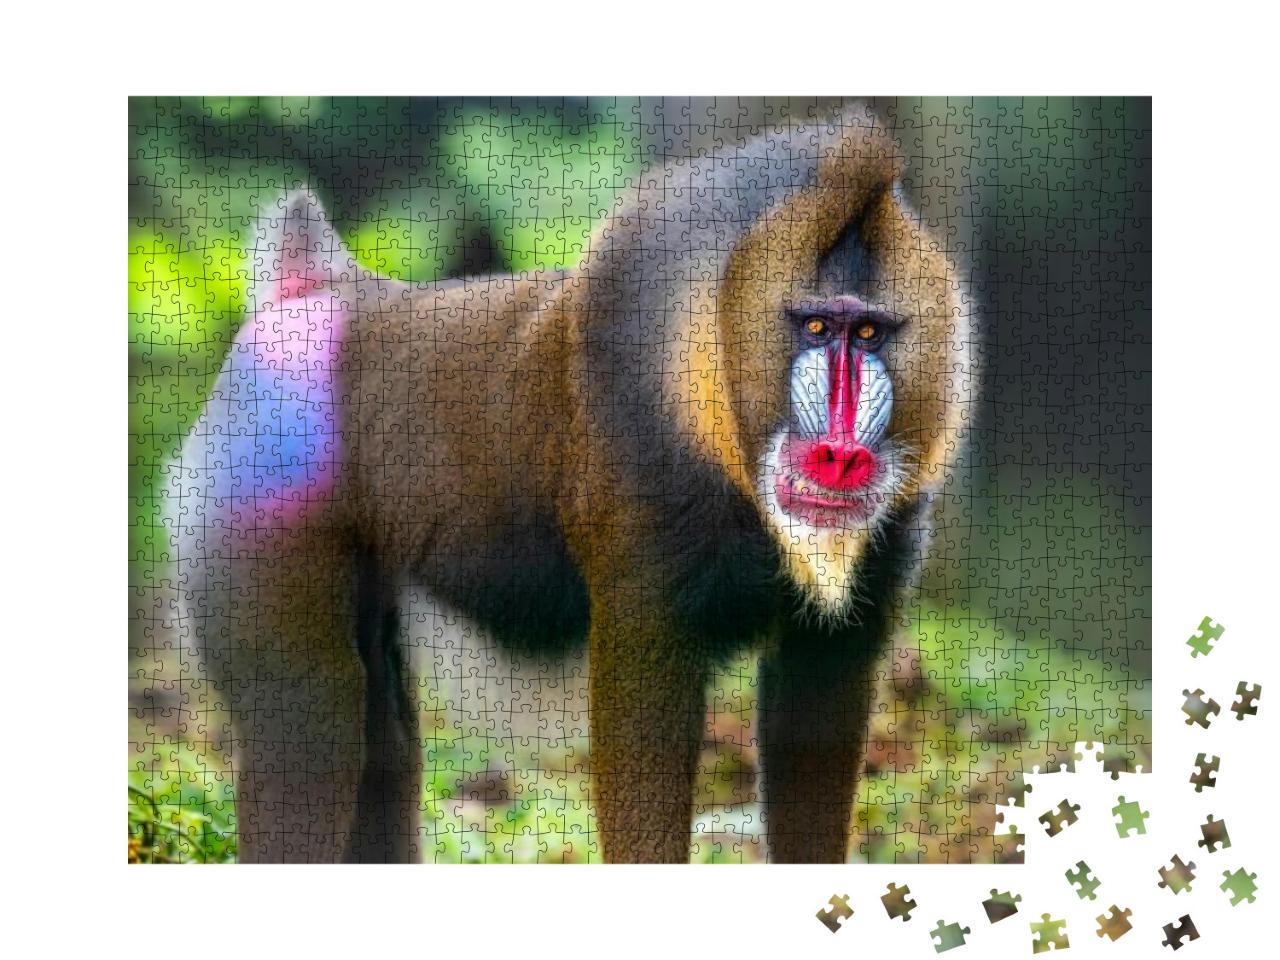 Beautiful Mandrill Portrait Closeup, Baboon Monkey with C... Jigsaw Puzzle with 1000 pieces